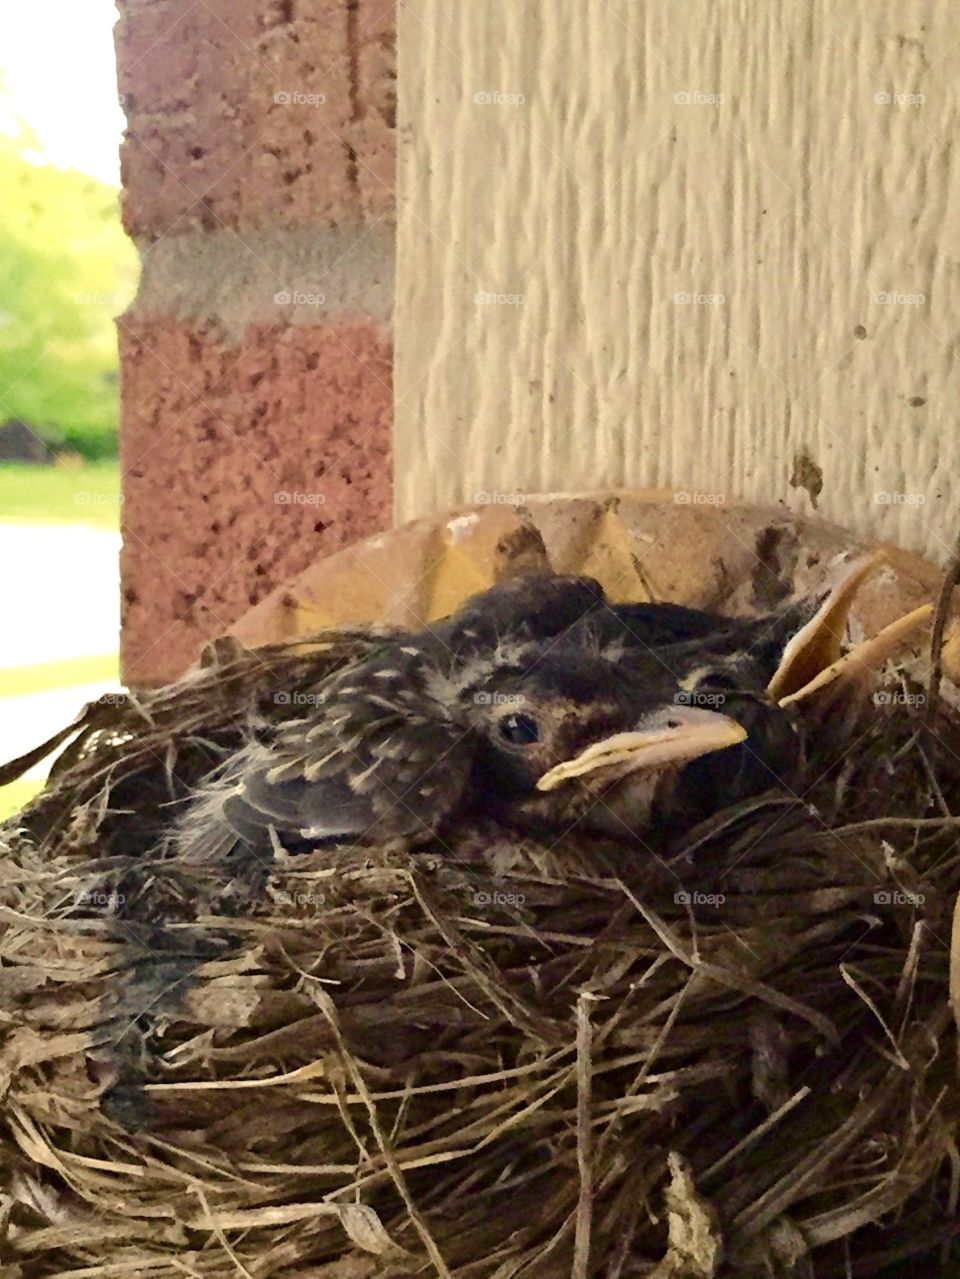 Baby Robin. This a baby robin in its nest.